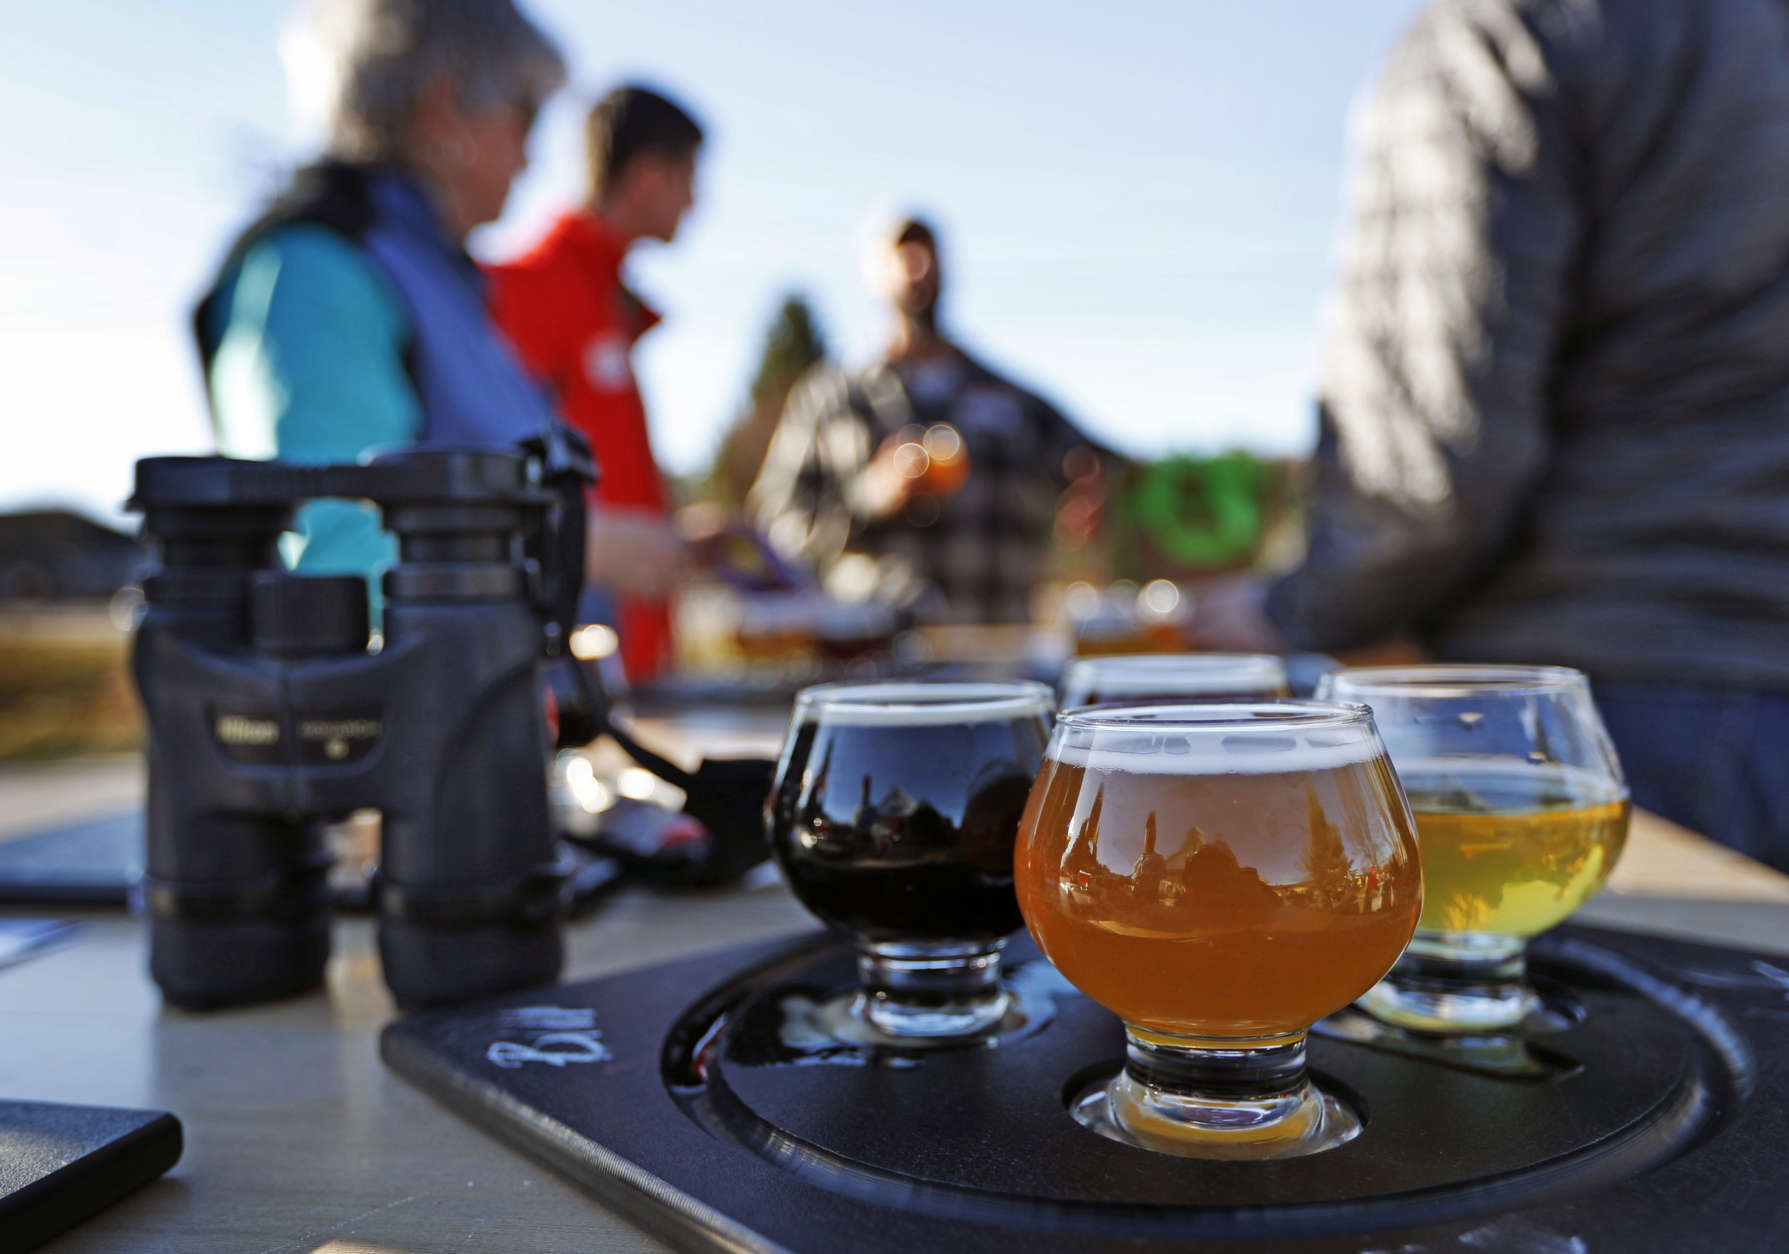 In this Sunday, Nov. 13, 2016 photo a group of birding enthusiasts finish discuss their day while sampling a flight of beers at the Maine Brewing Company in Freeport, Maine. The Maine Brew Bus tour group combines bird watching and craft beers into popular trips throughout southern Maine. (AP Photo/Robert F. Bukaty)